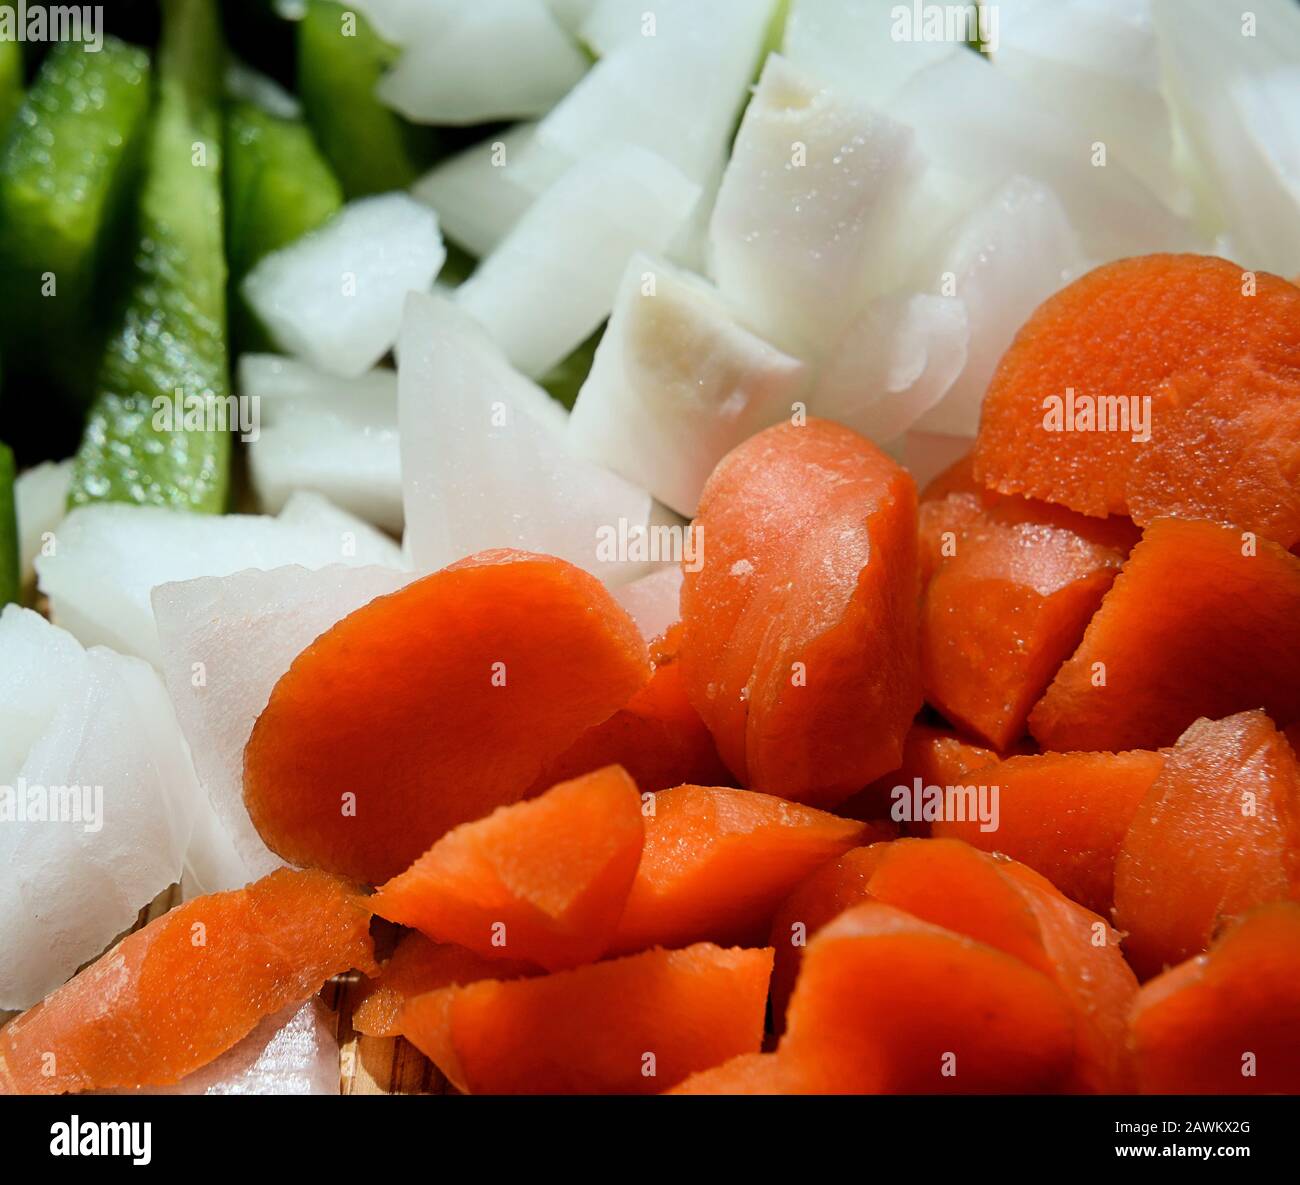 Chopped carrots, green pepper and onions. Stock Photo